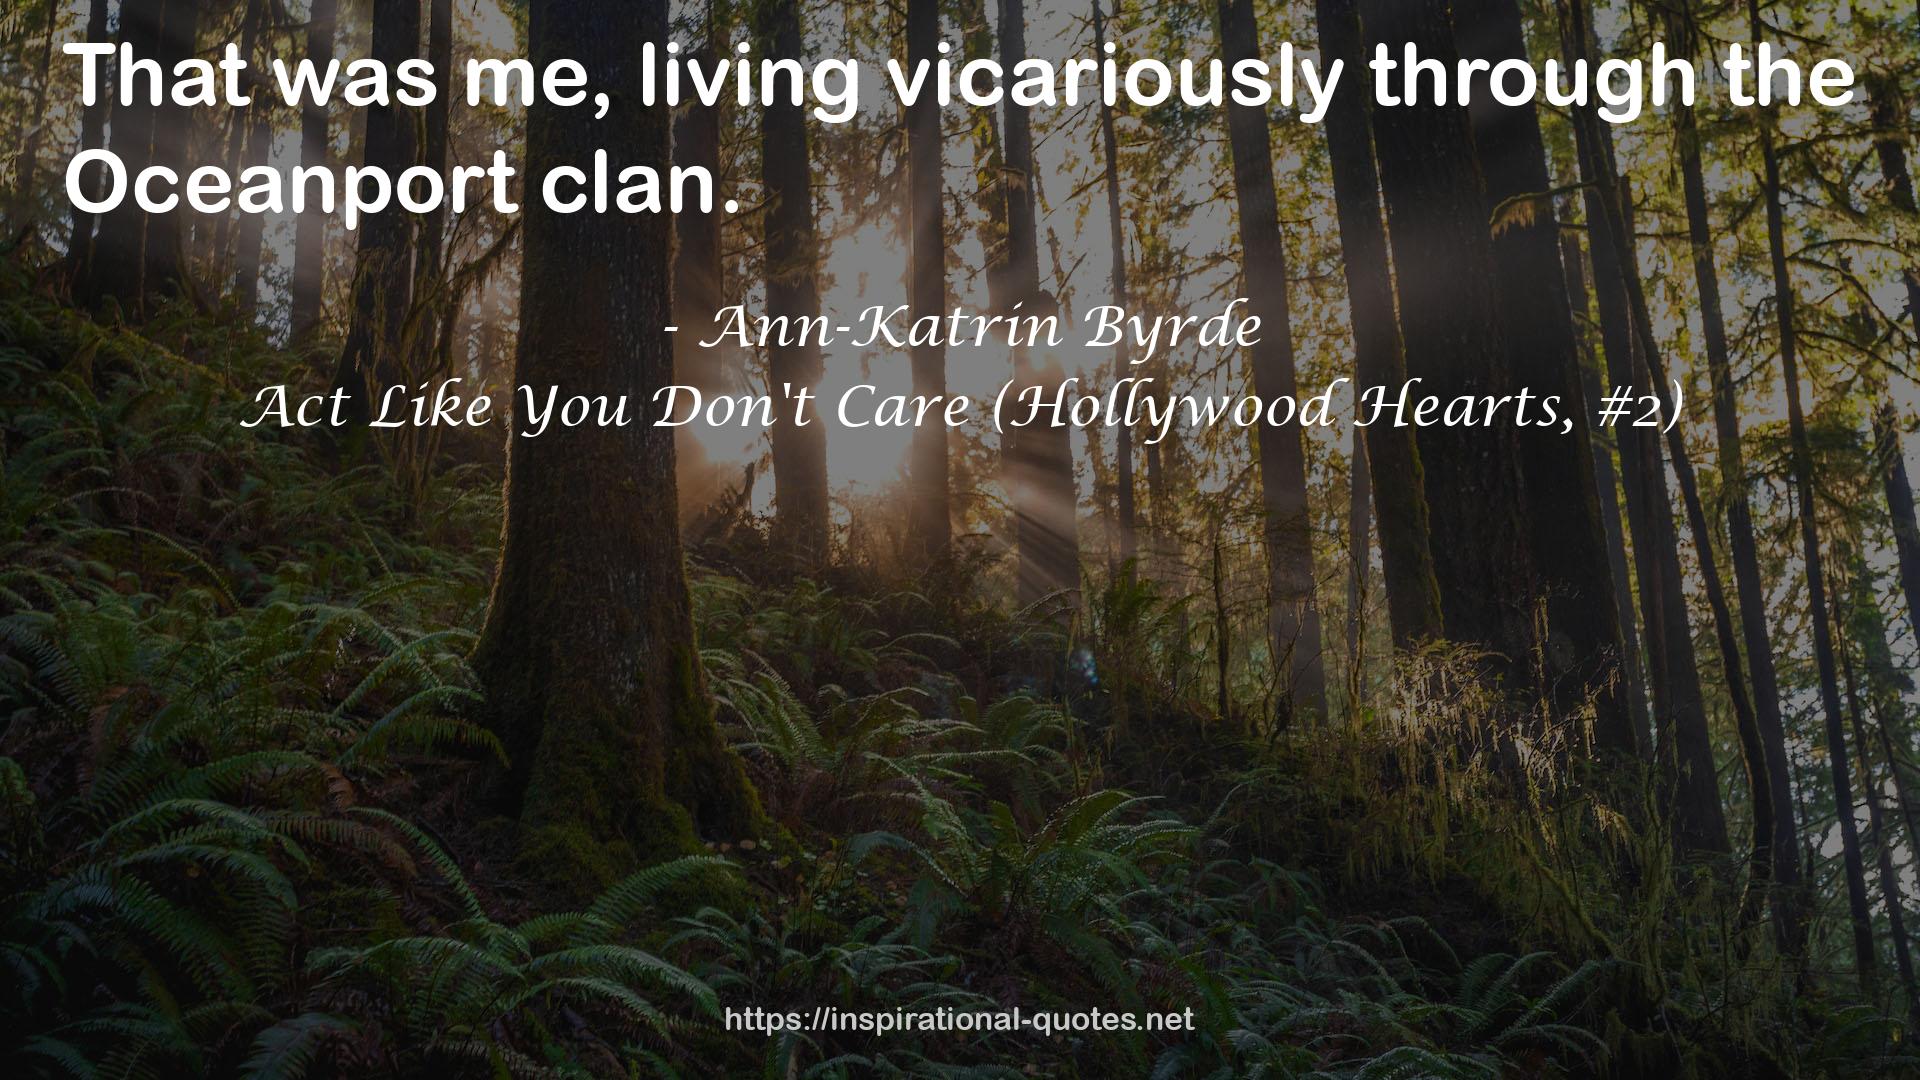 Act Like You Don't Care (Hollywood Hearts, #2) QUOTES